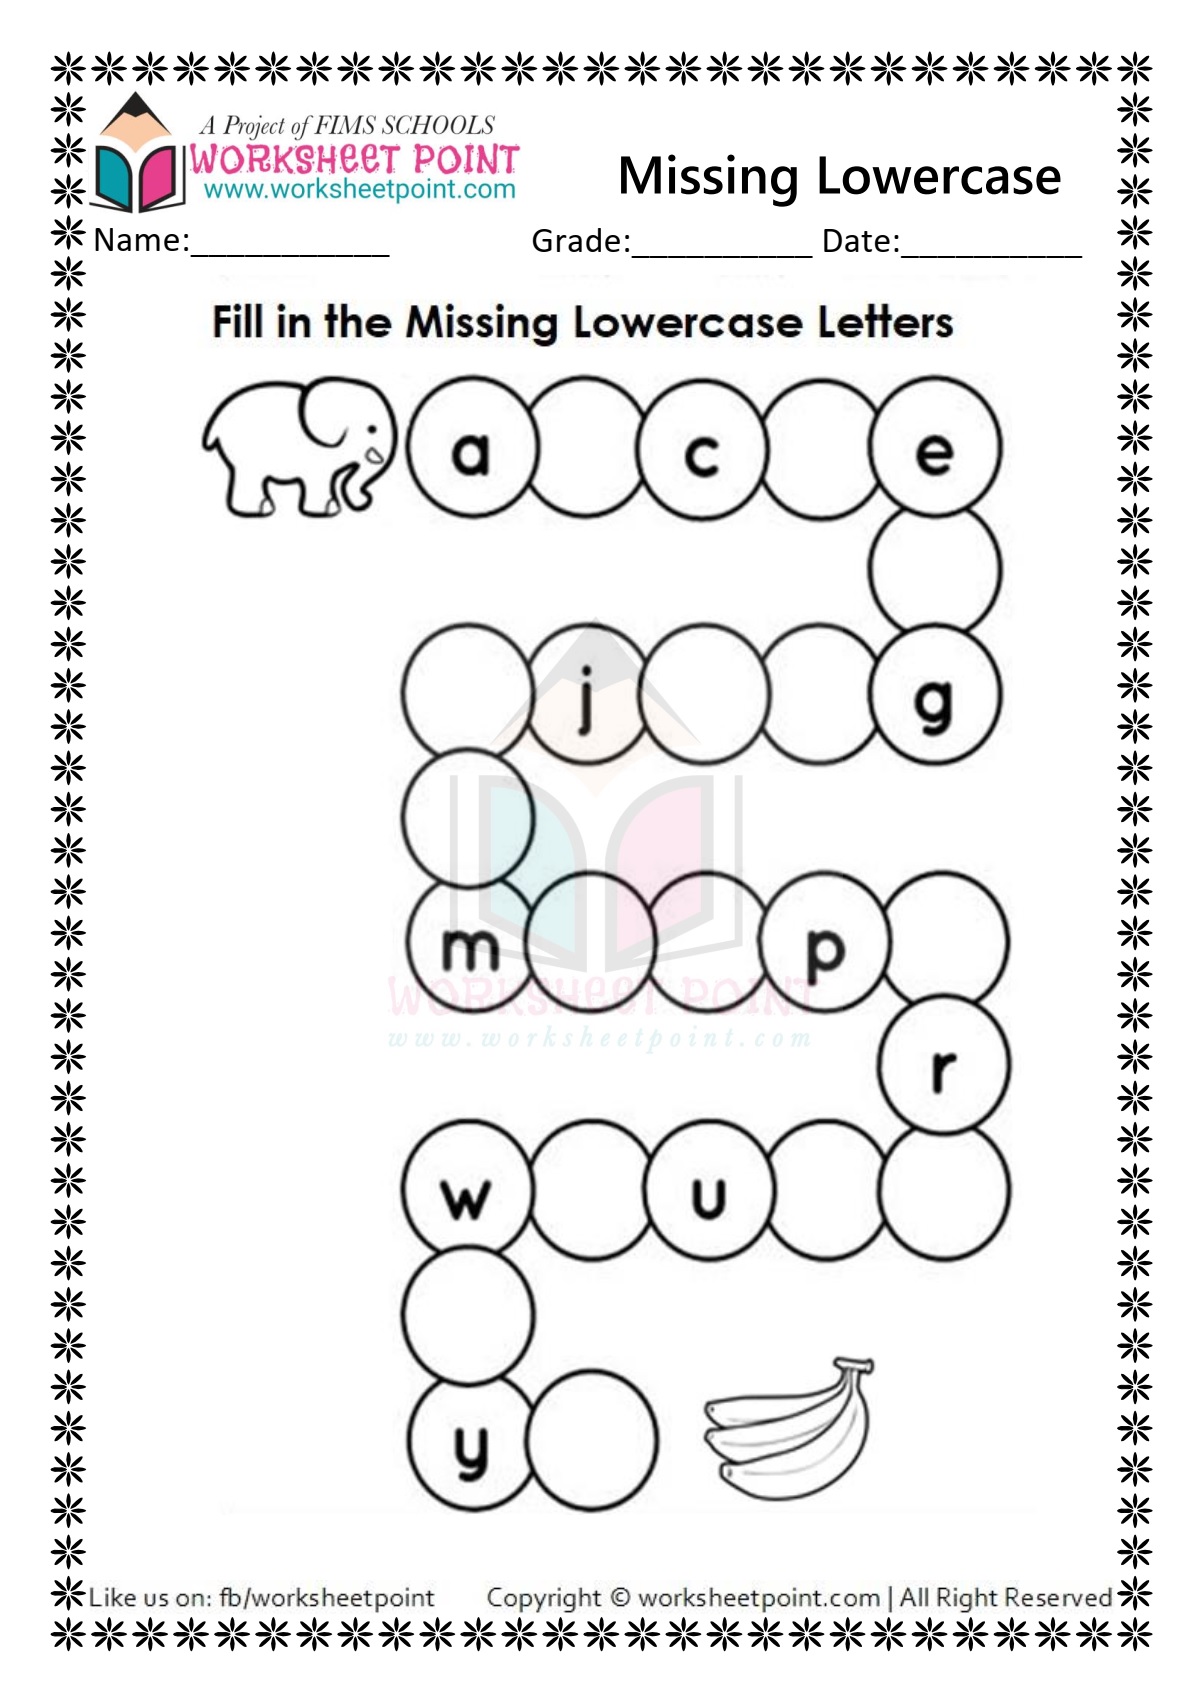 Fill in the Missing Lowercase Letters - Worksheet Point